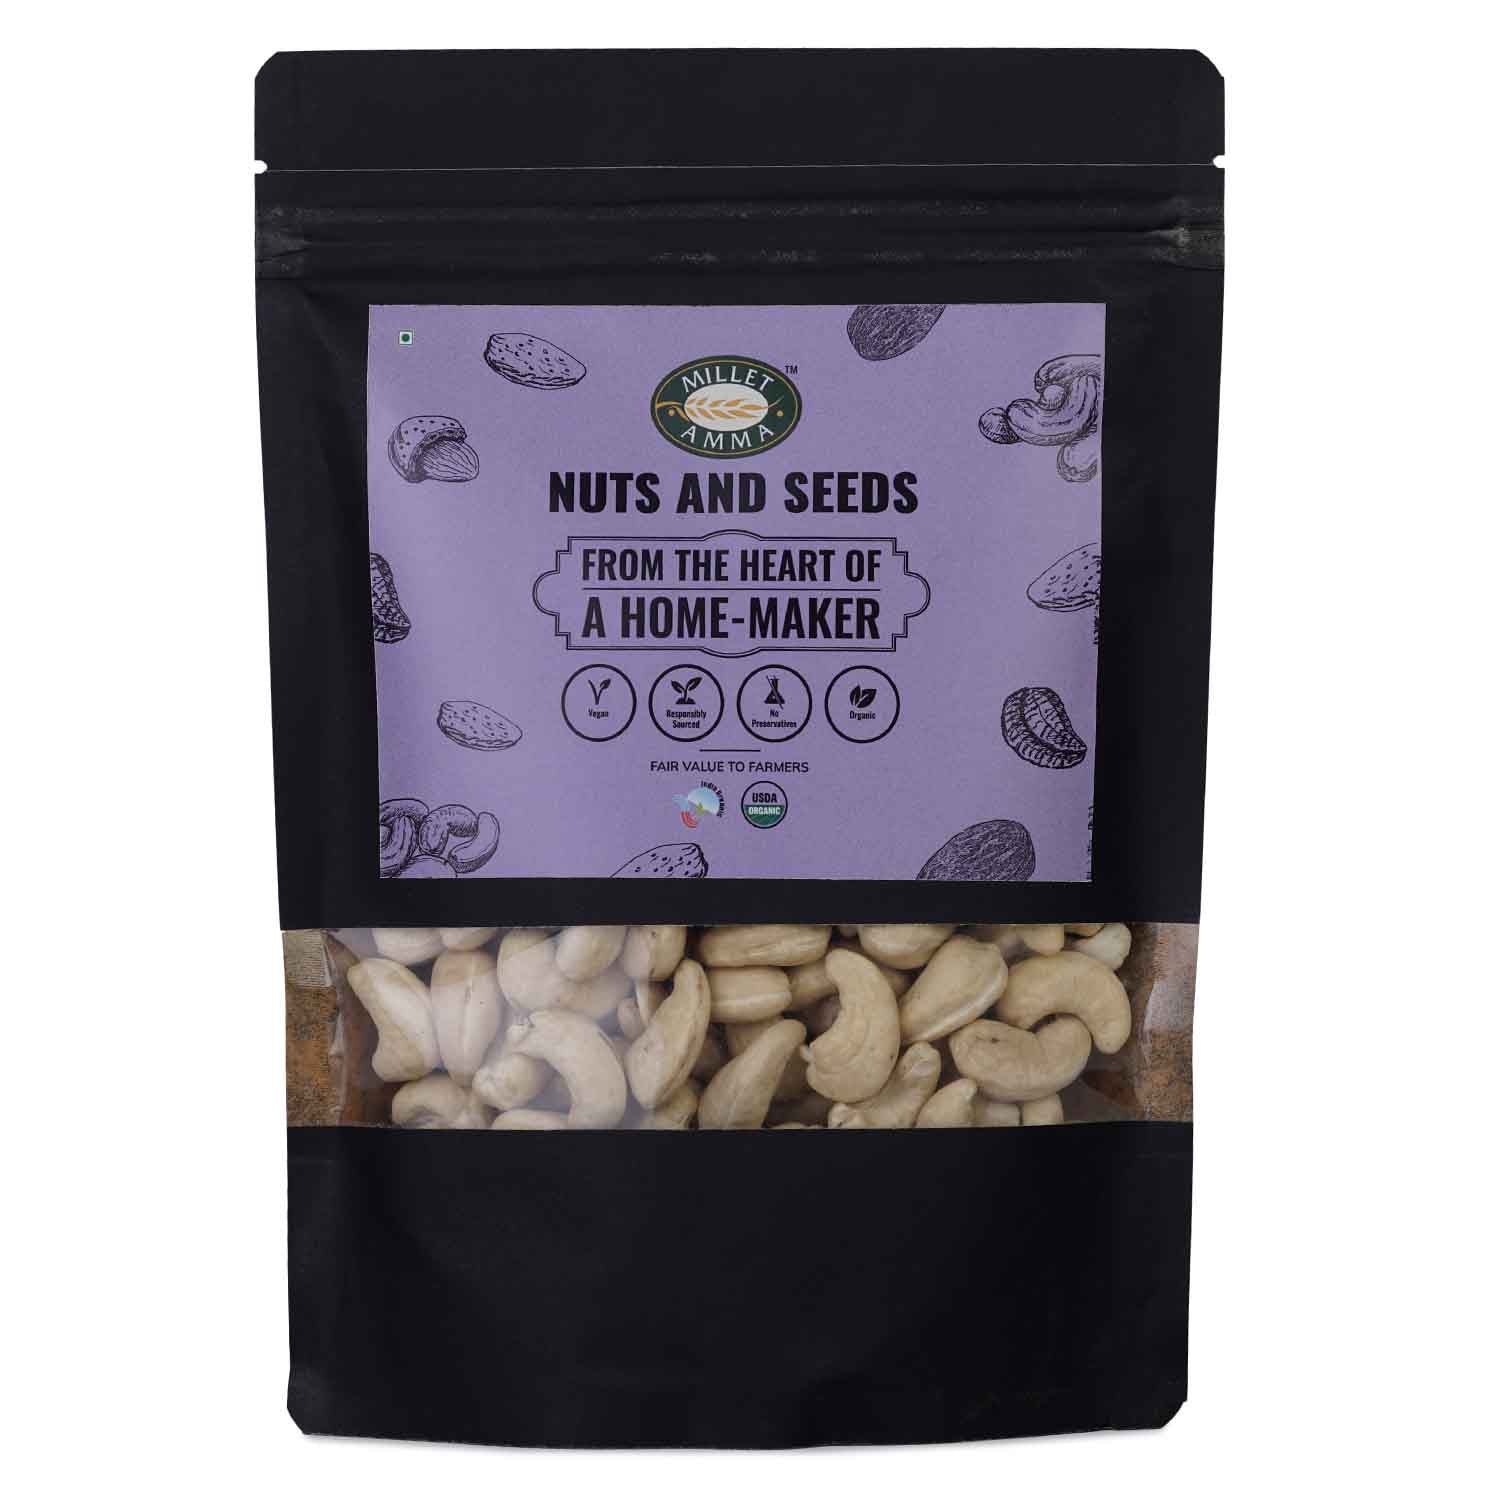 Milletamma’s cashews are rich in healthy fatty acids, proteins and antioxidants.  It contains numerous phytochemicals that helps in preventing cancer.  It contains MUFA (Mono Unsaturated Fatty Acids) like oleic, and palmitoleic acids that help in maintaining good heart health.